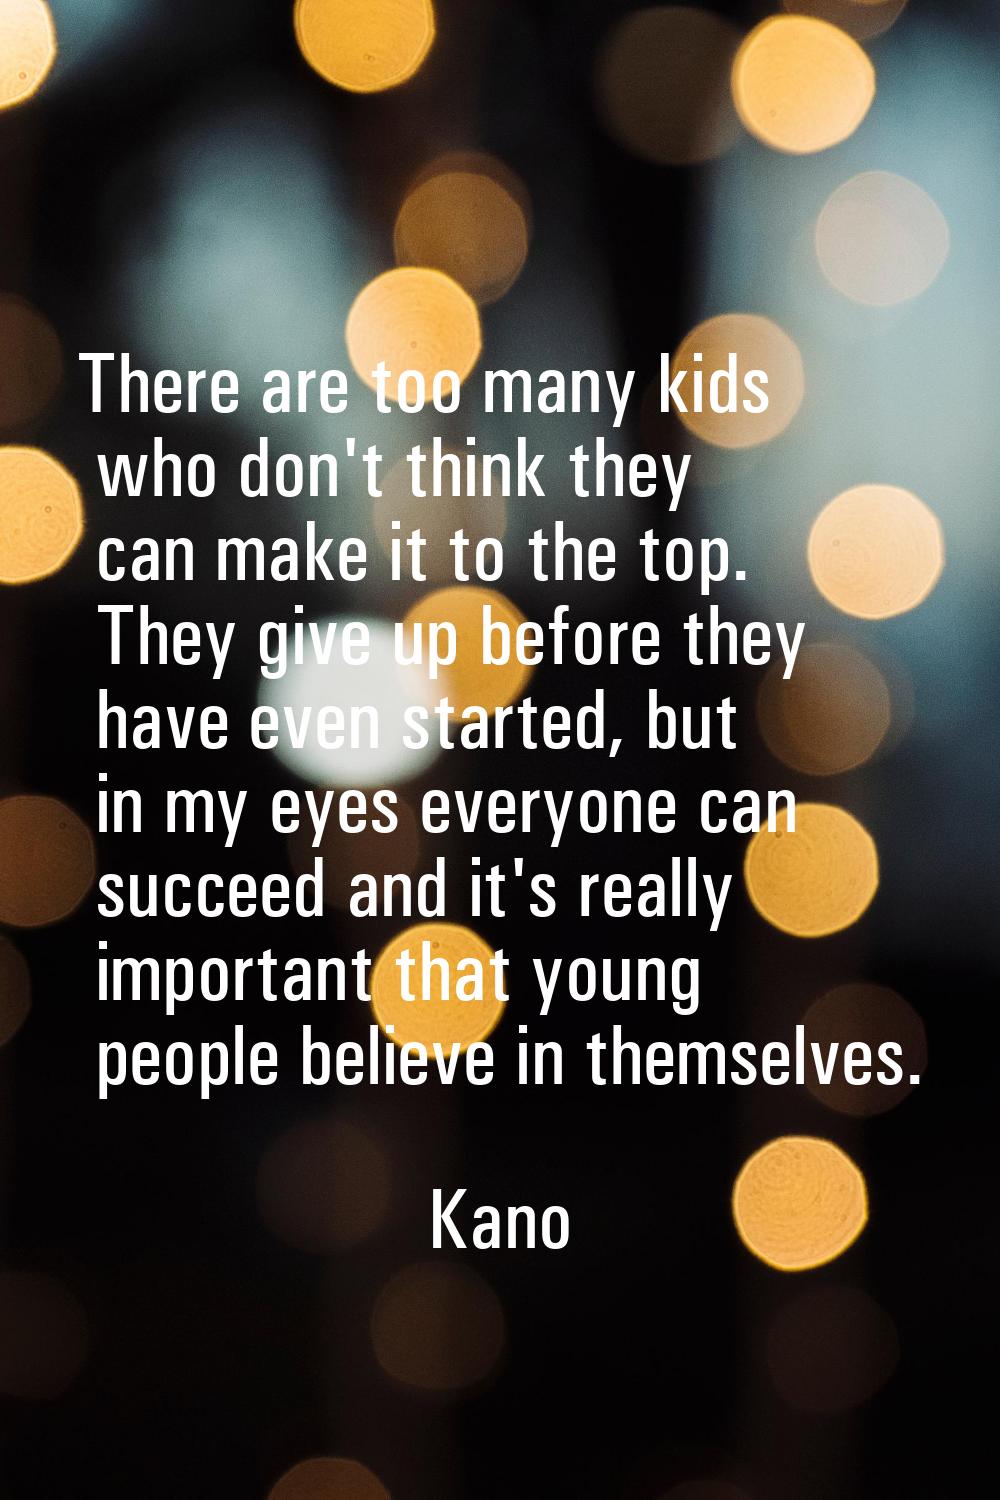 There are too many kids who don't think they can make it to the top. They give up before they have 